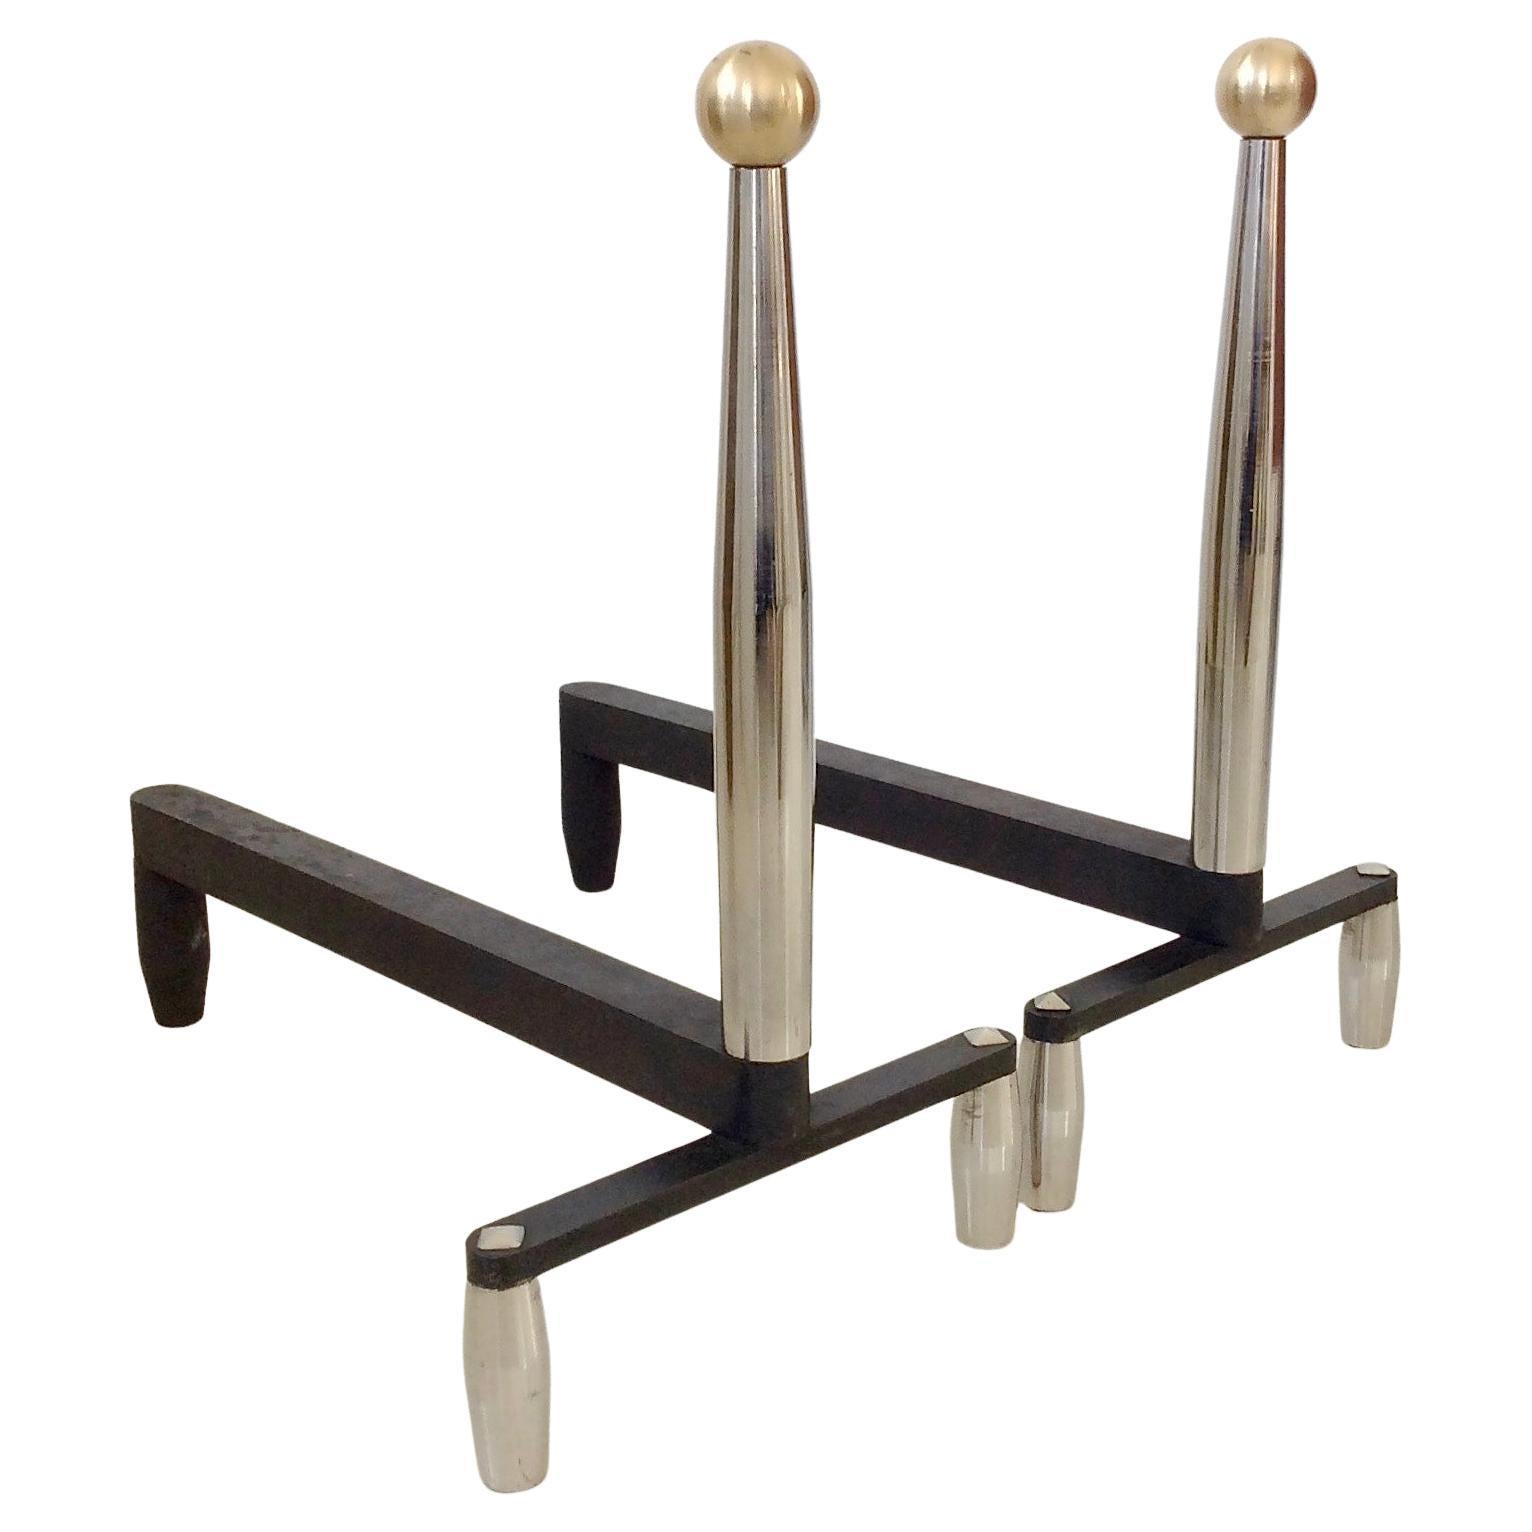 Pair of elegant and large andirons, circa 1960, France.
Chromed metal, brass and black wrought iron.
Dimensions: 40 cm H, 40 cm D, 23 cm W.
All purchases are covered by our Buyer Protection Guarantee.
This item can be returned within 7 days of